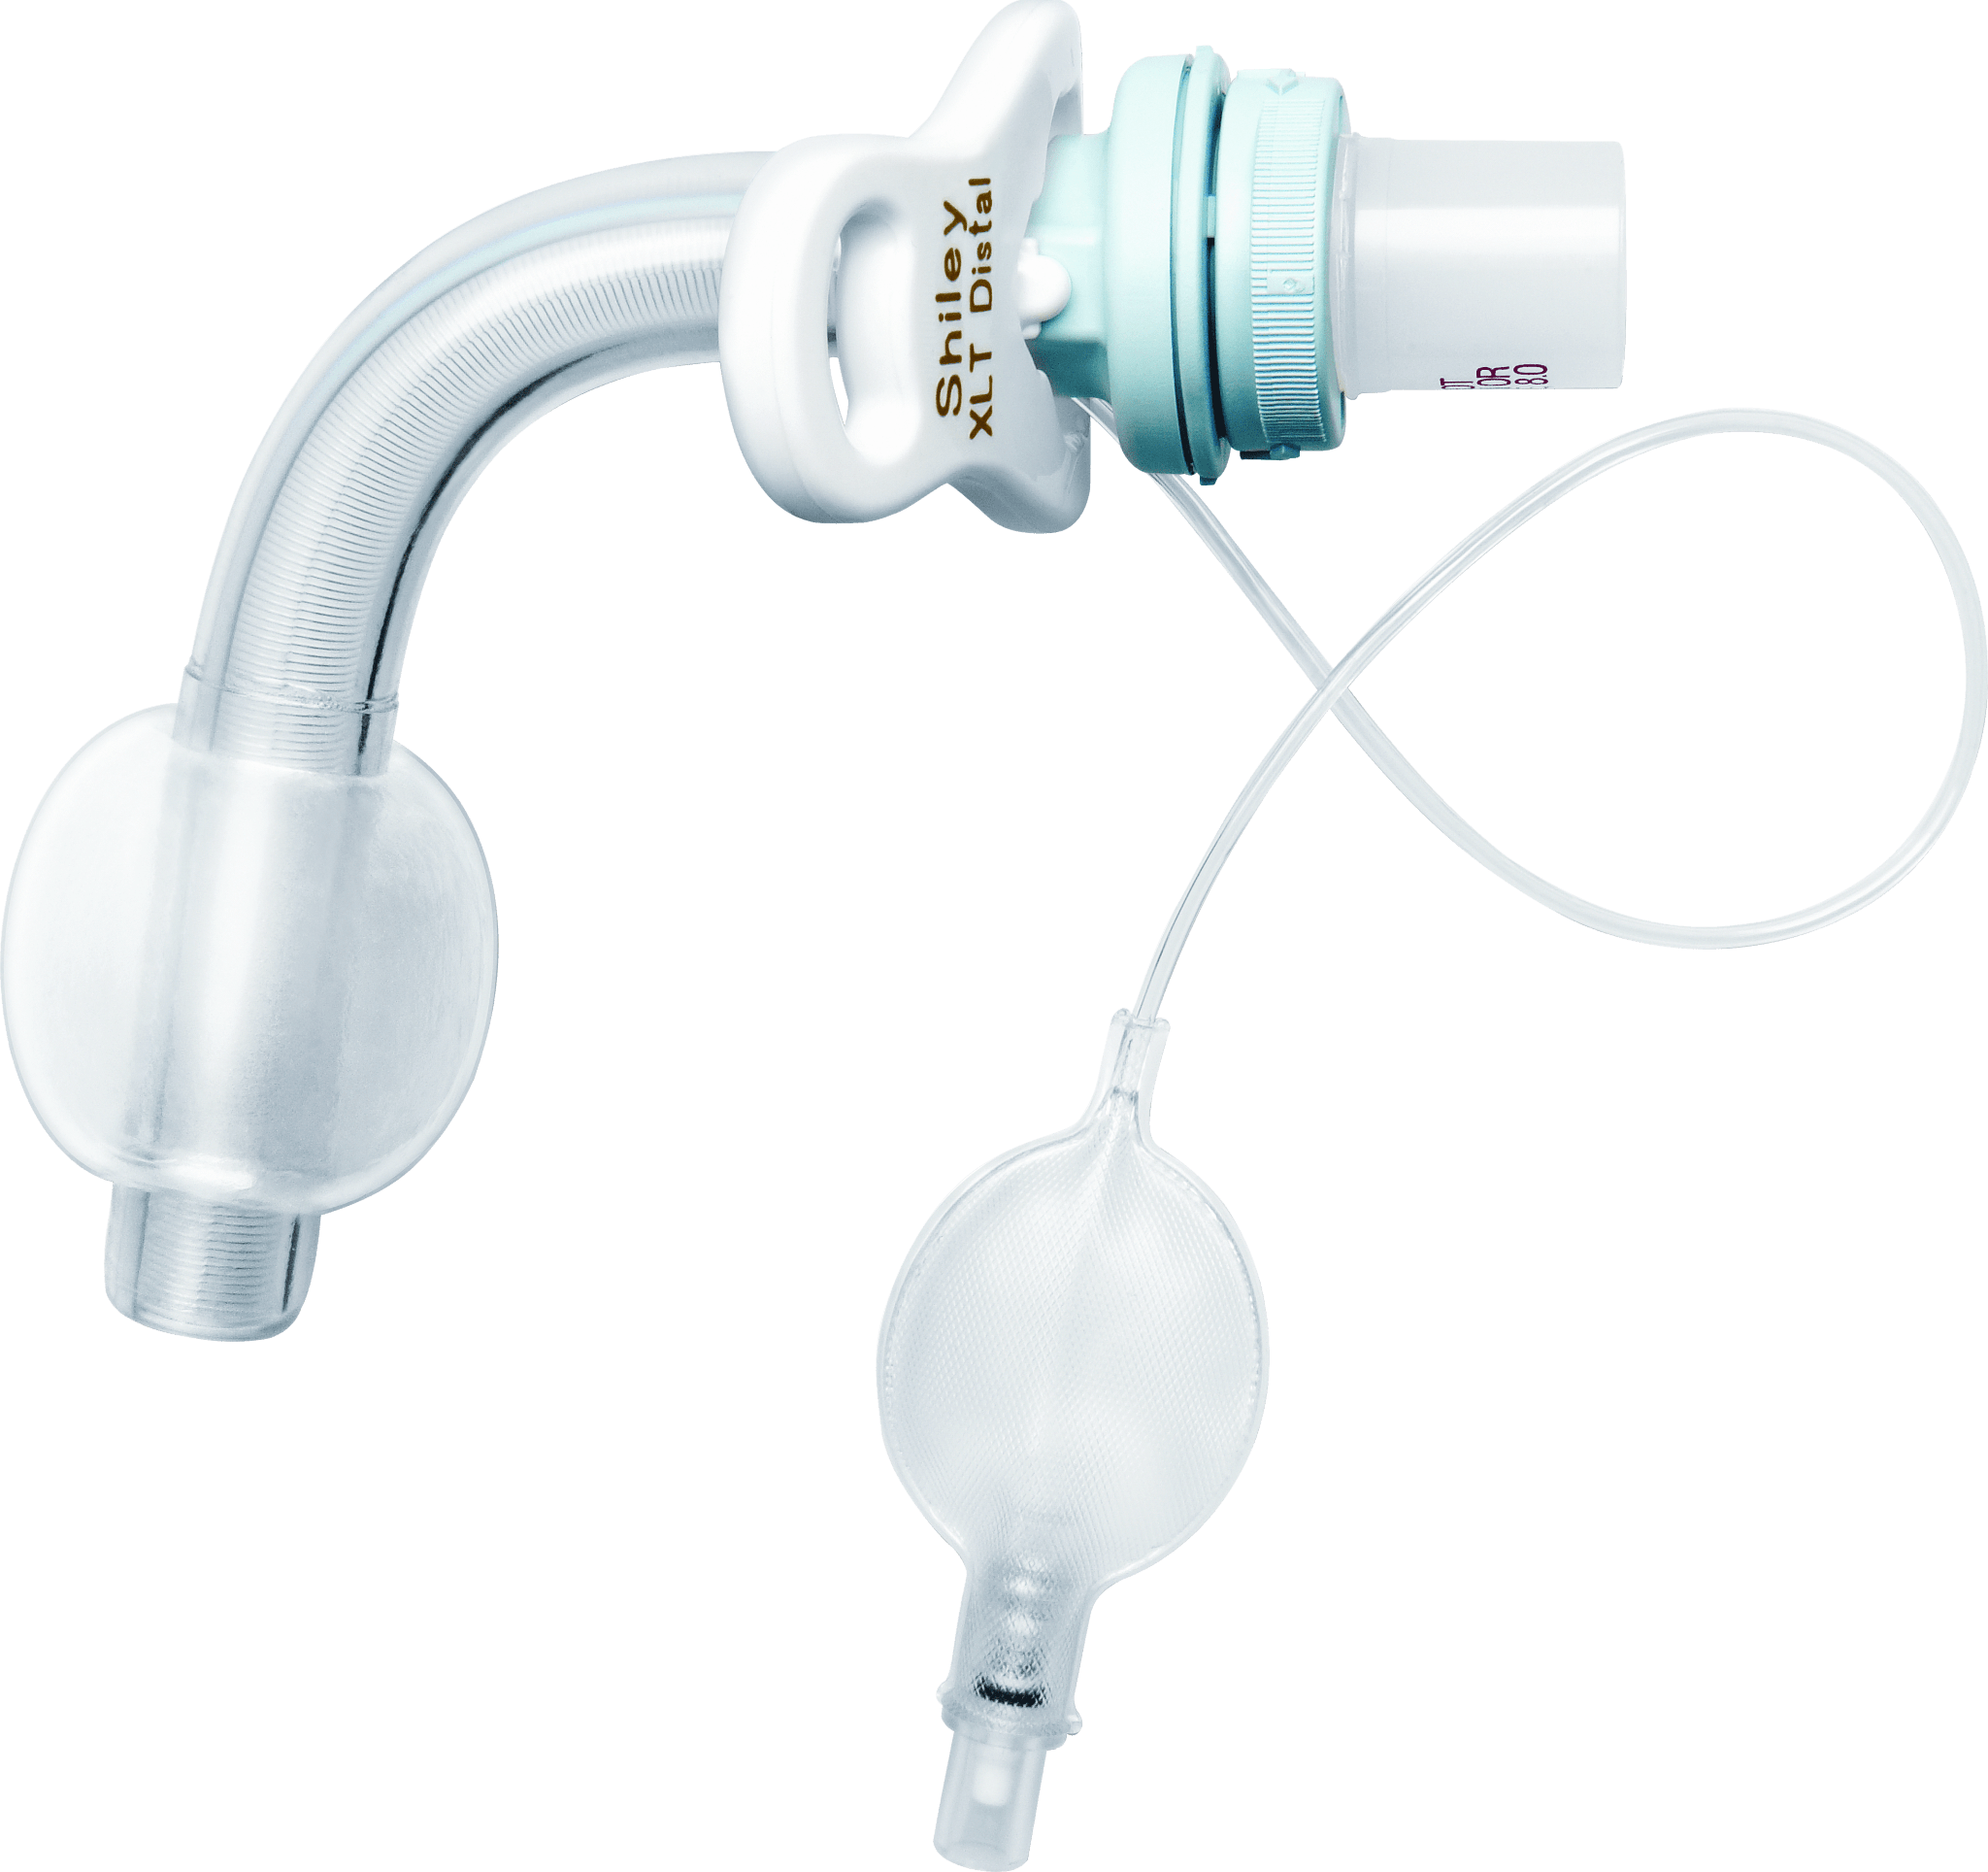 EA/1 - Mallinckrodt Medical Inc Shiley&trade; XLT Extended-Length Cuffed Tracheostomy Tube 105mm L, 8mm I.D. x 13-2/7mm O.D., Distal Extension, White Flange - Best Buy Medical Supplies